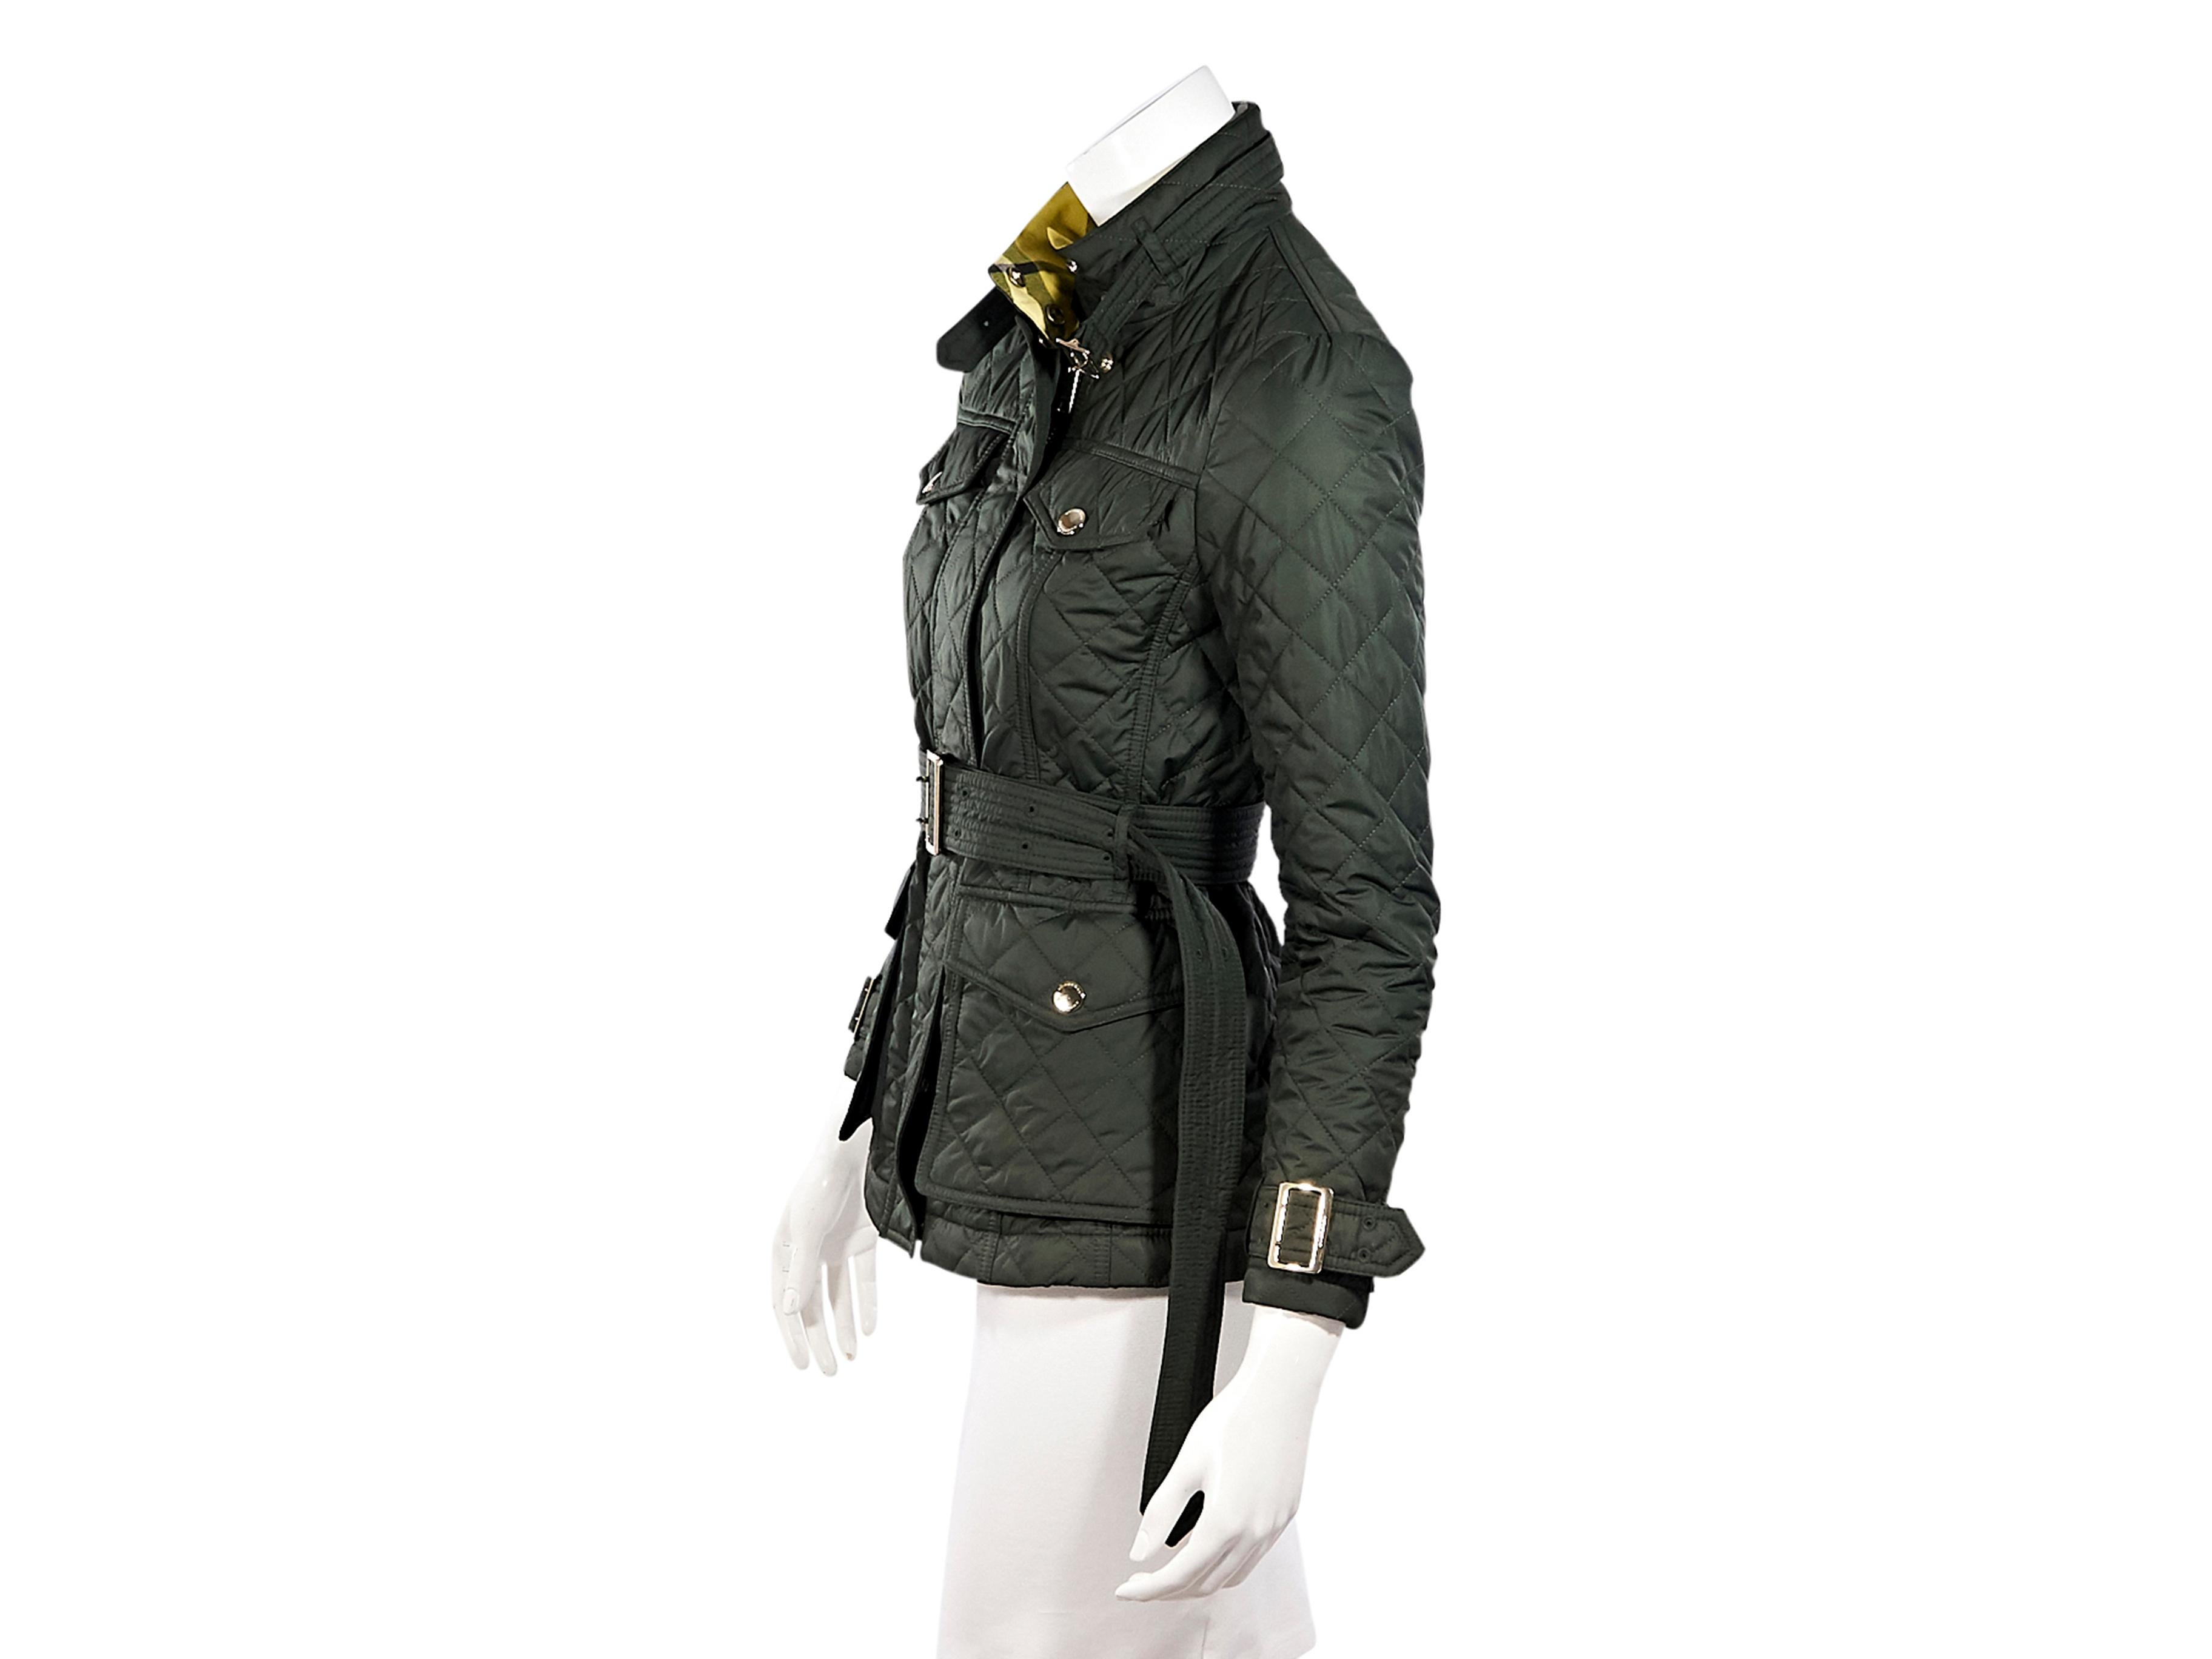 Product details:  Sage green quilted jacket by Burberry.  Stand collar with adjustable buckle.  Long sleeves.  Adjustable buckle cuffs.  Concealed zip-front closure.  Chest and waist snap flap pockets.  Adjustable belted waist.  Goldtone hardware. 